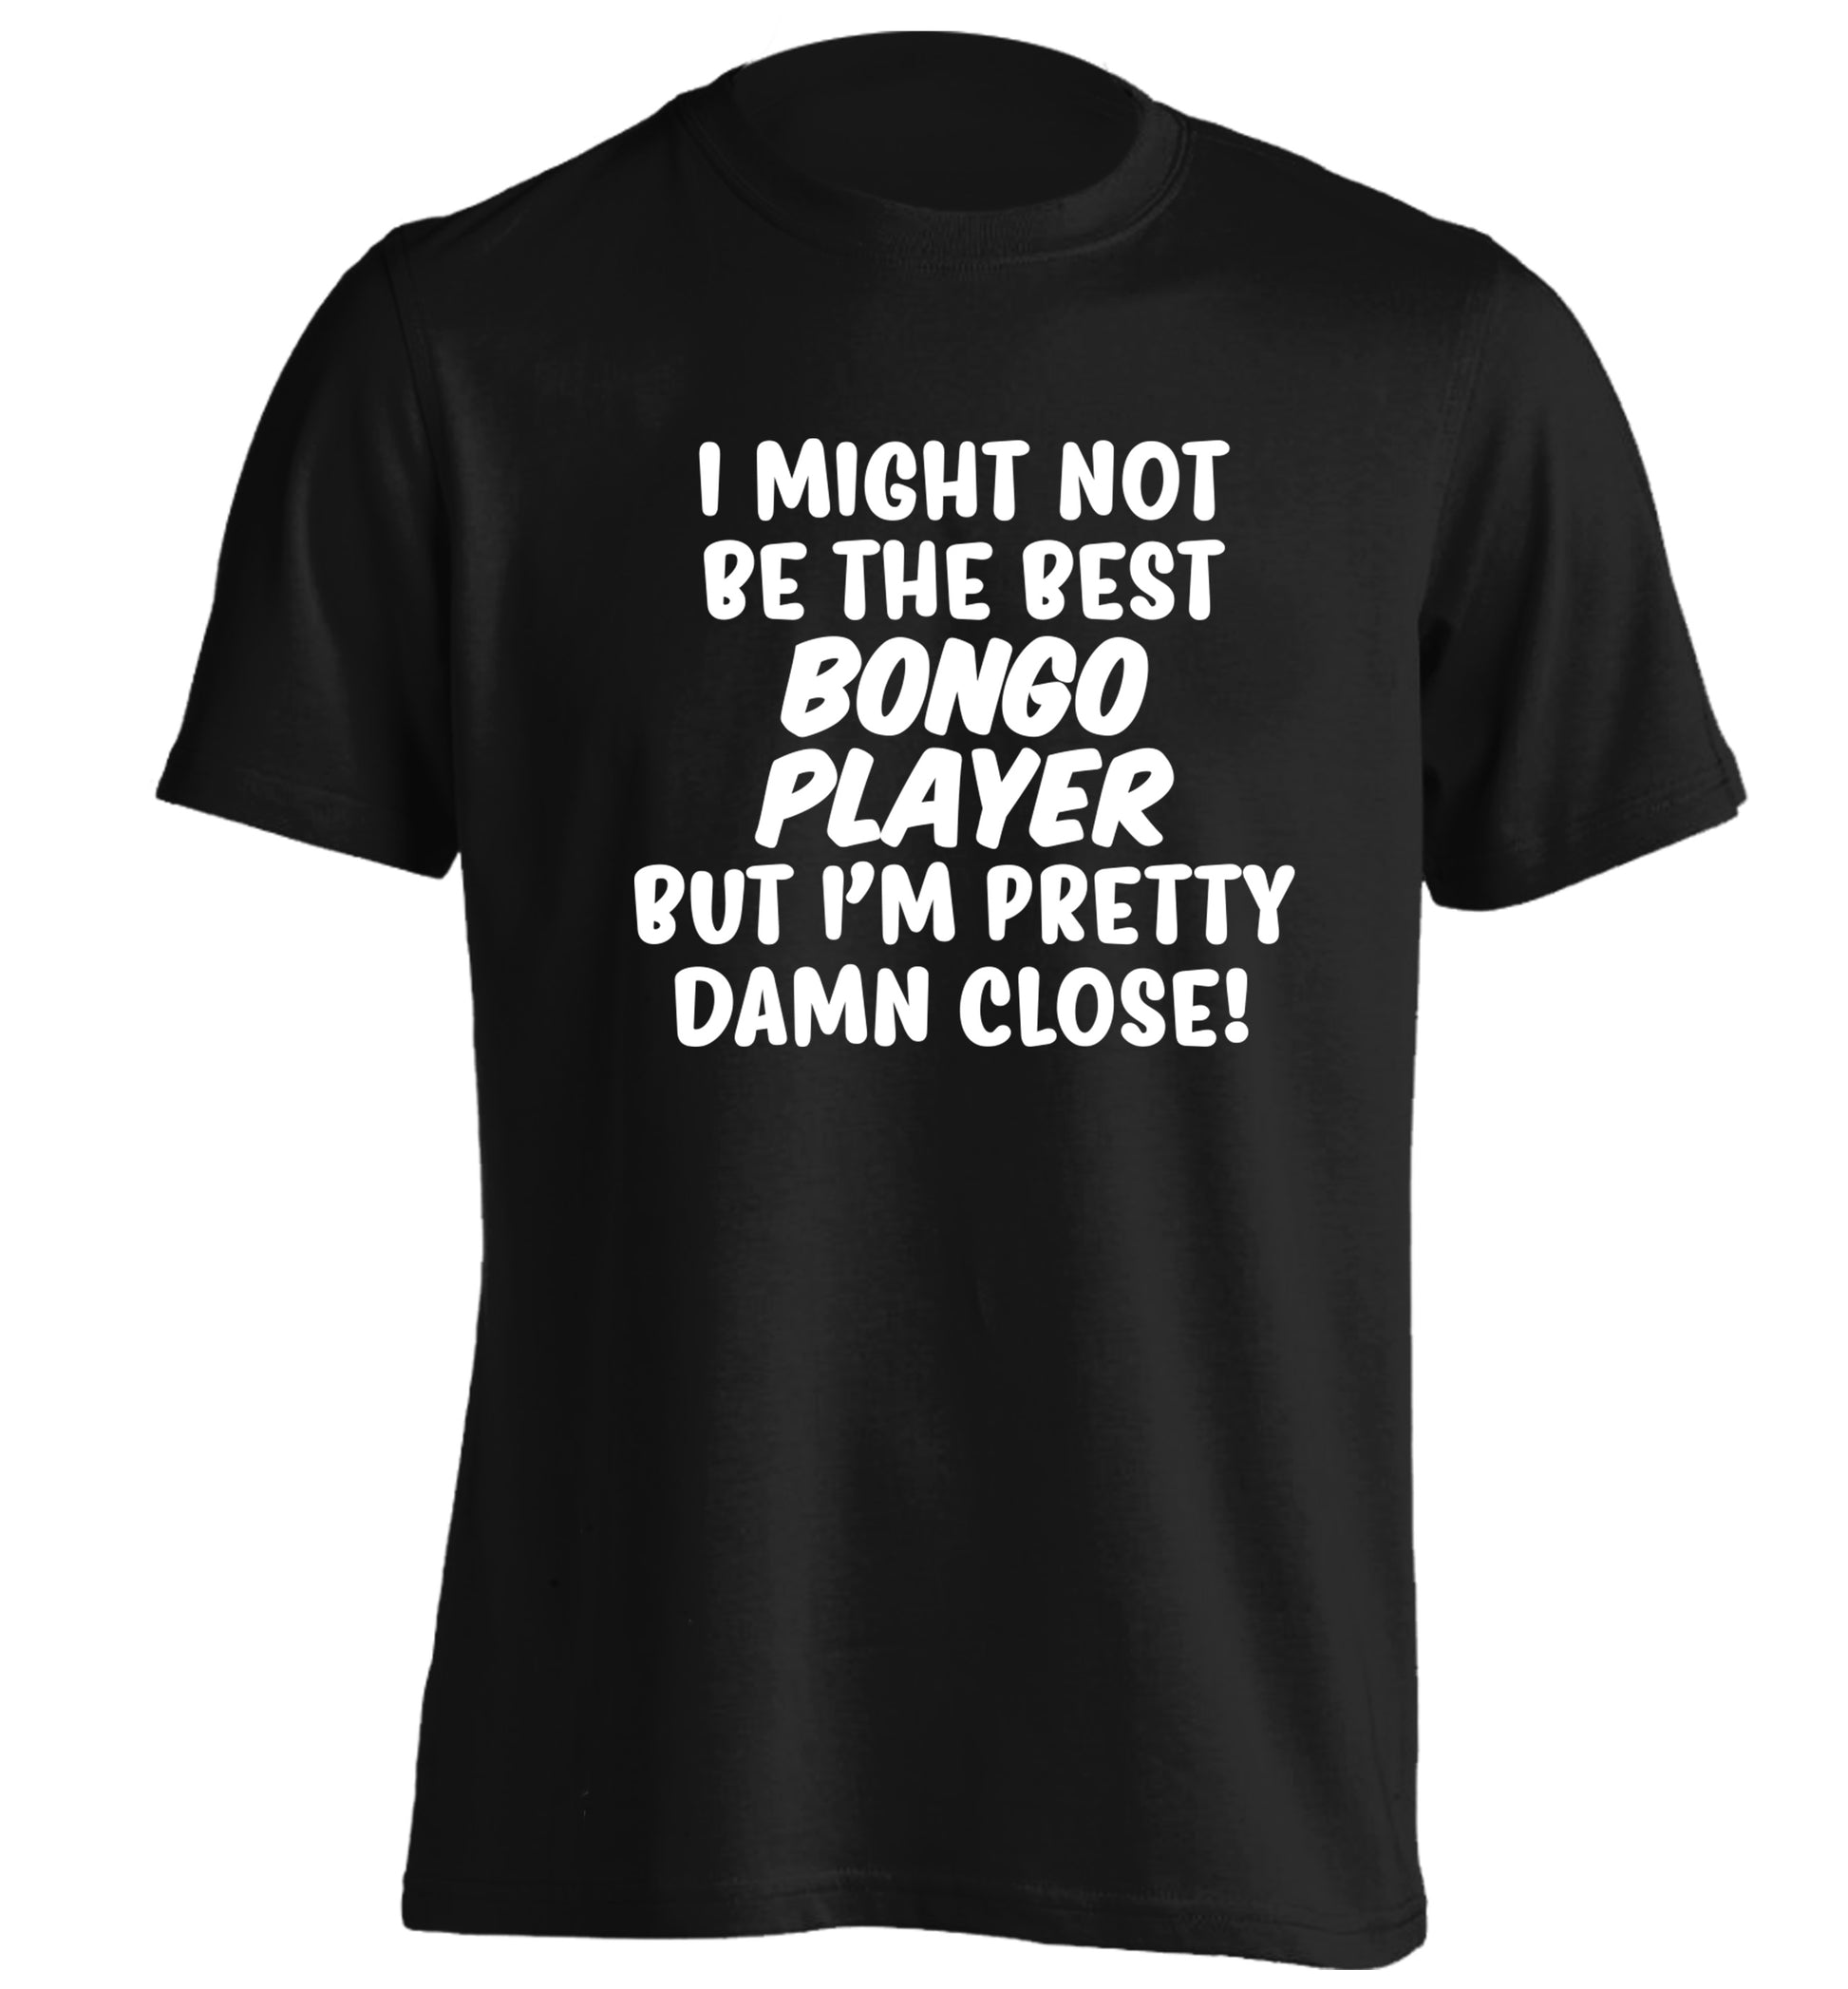 I might not be the best bongo player but I'm pretty close! adults unisexblack Tshirt 2XL